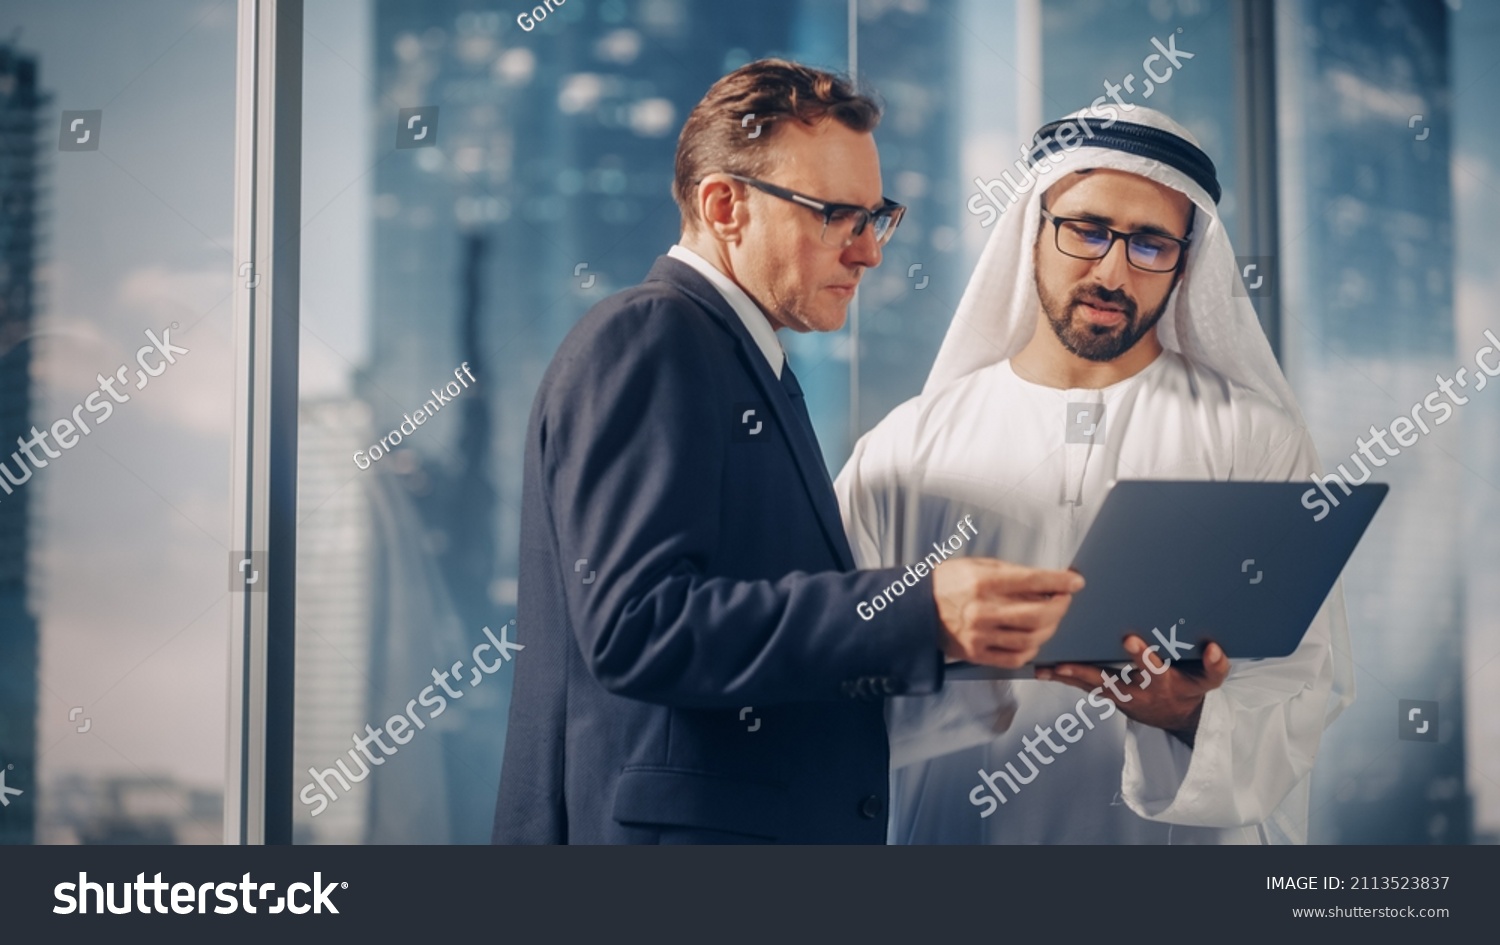 International Operations Manager Meeting Saudi Business Partner in Traditional Kandura. They're Standing in Modern Office, Using Laptop Computer. Successful Saudi, Emirati, Arab Businessman Concept. #2113523837